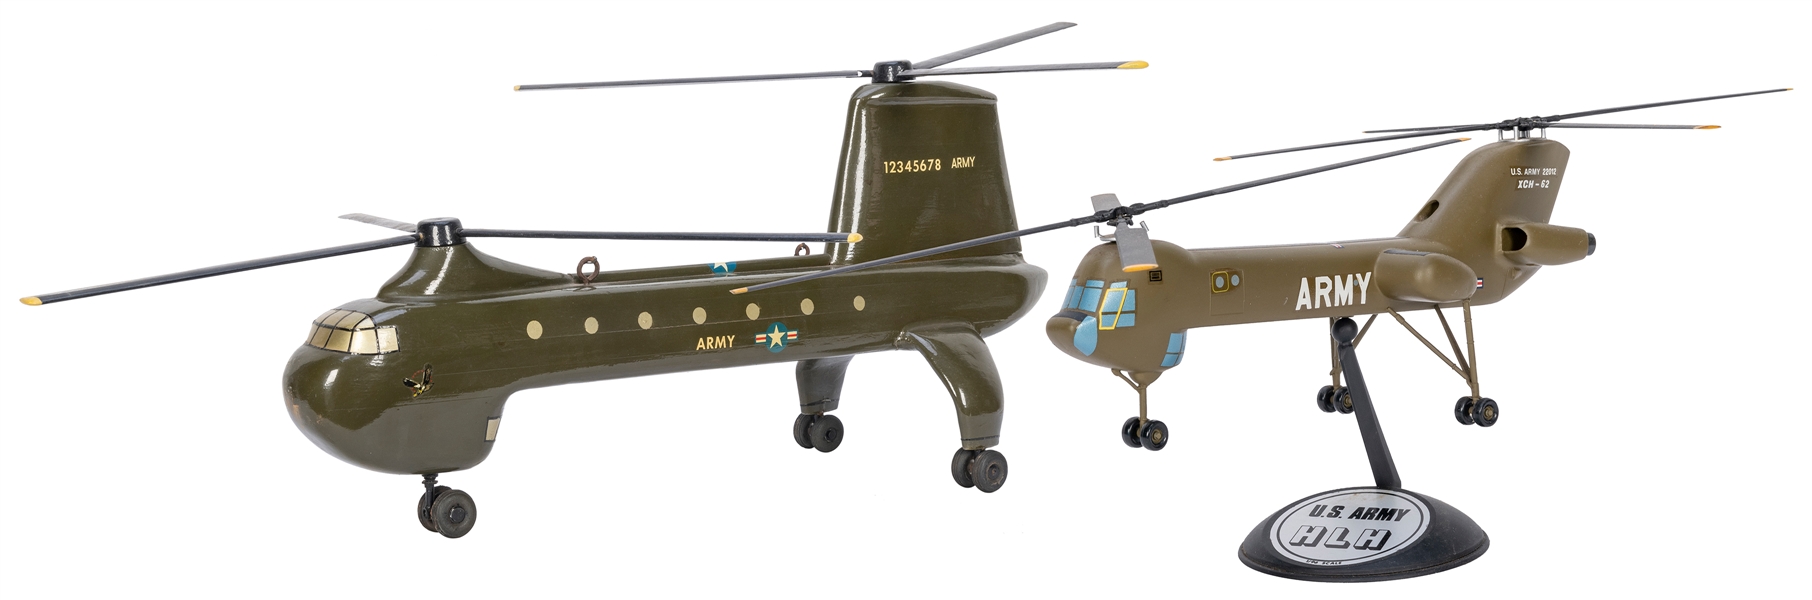 [MILITARIA]. – [BOEING VERTOL]. A group of models and original concept artwork of the unproduced Boeing XCH-62 helicopter.